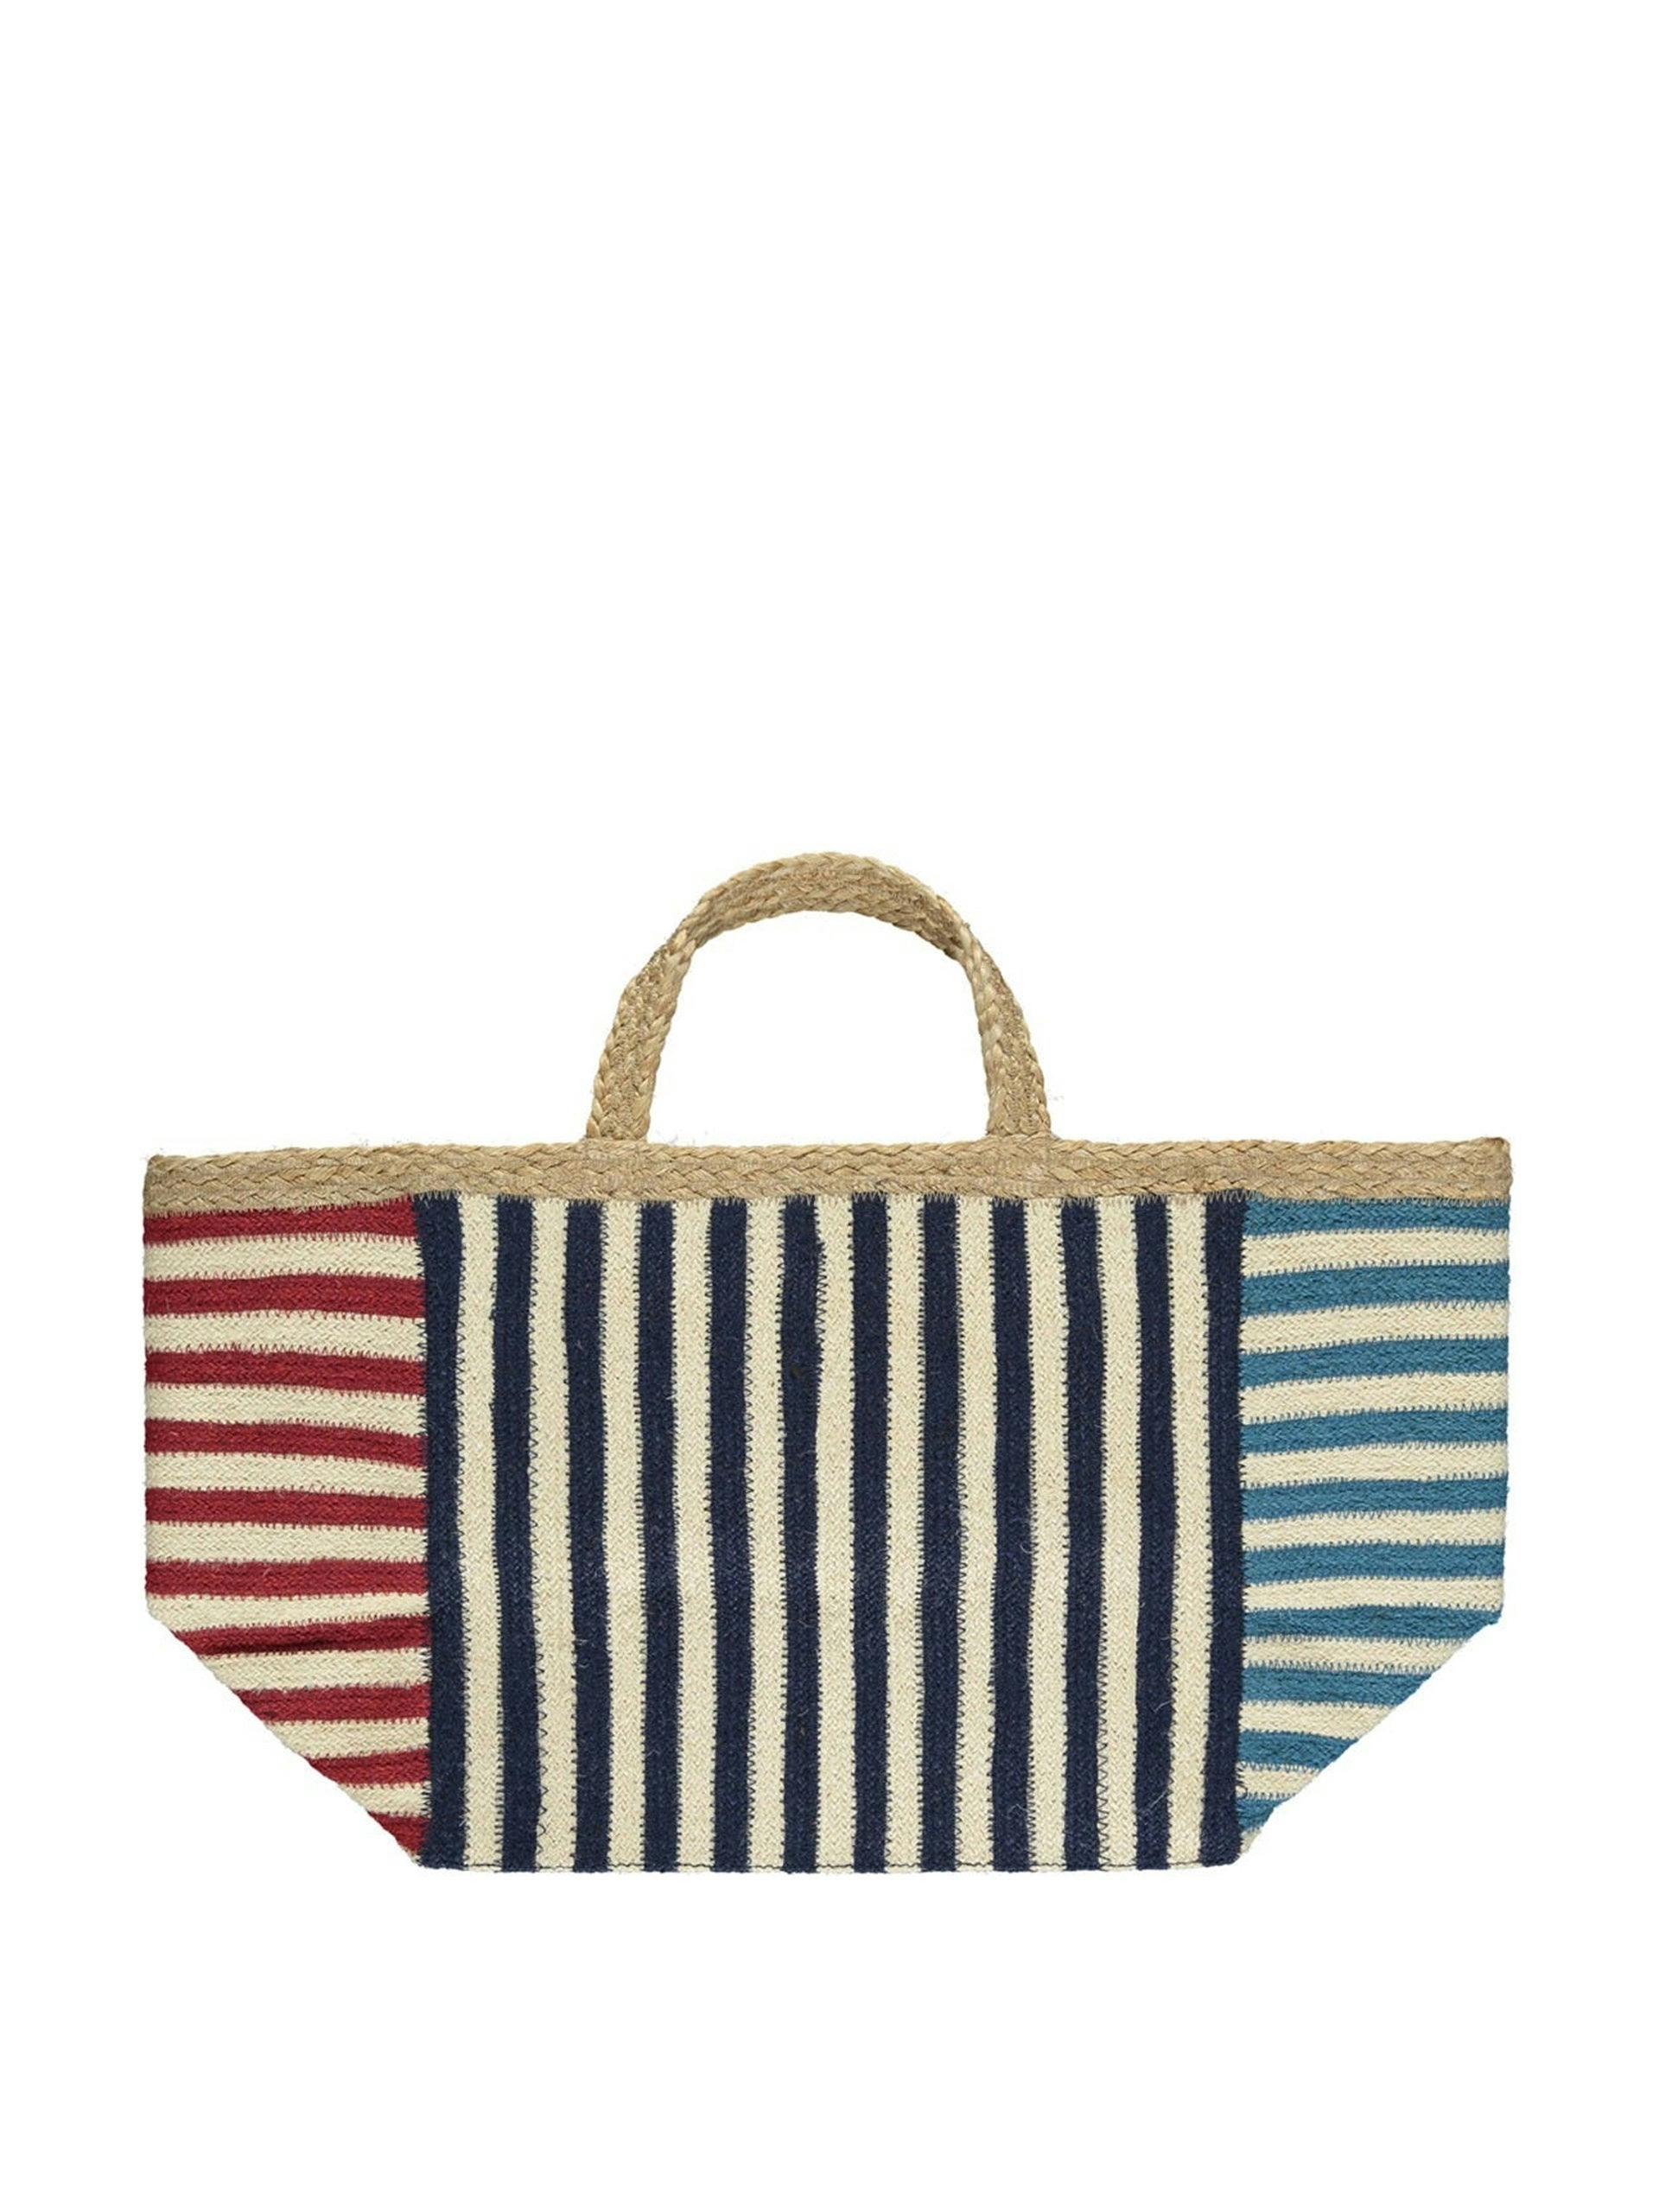 Red and white striped jute bag